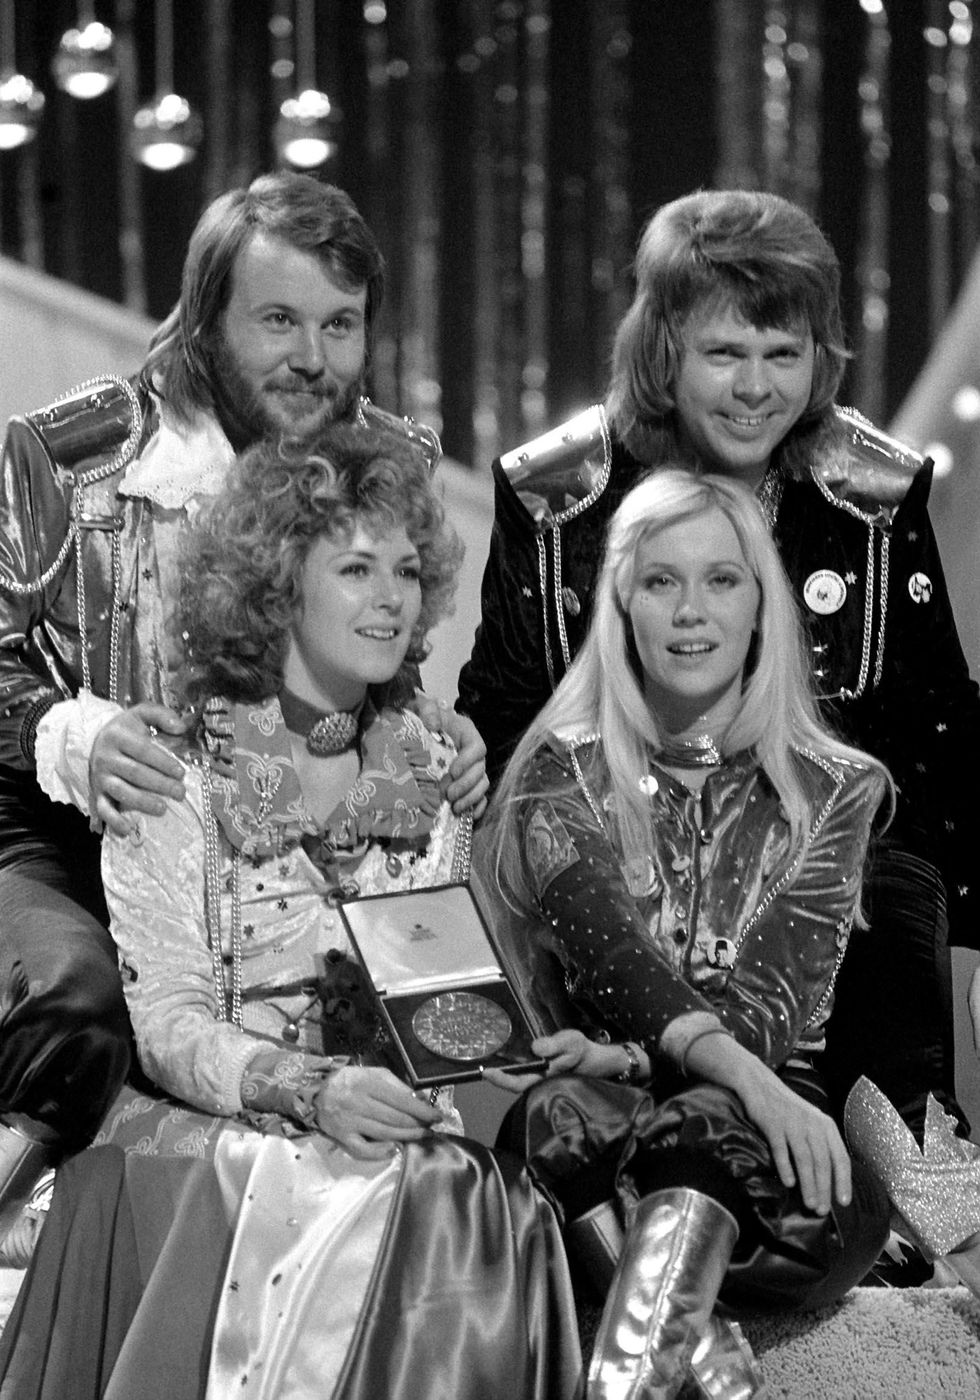 Abba’s Waterloo album to be reissued for 50th anniversary special